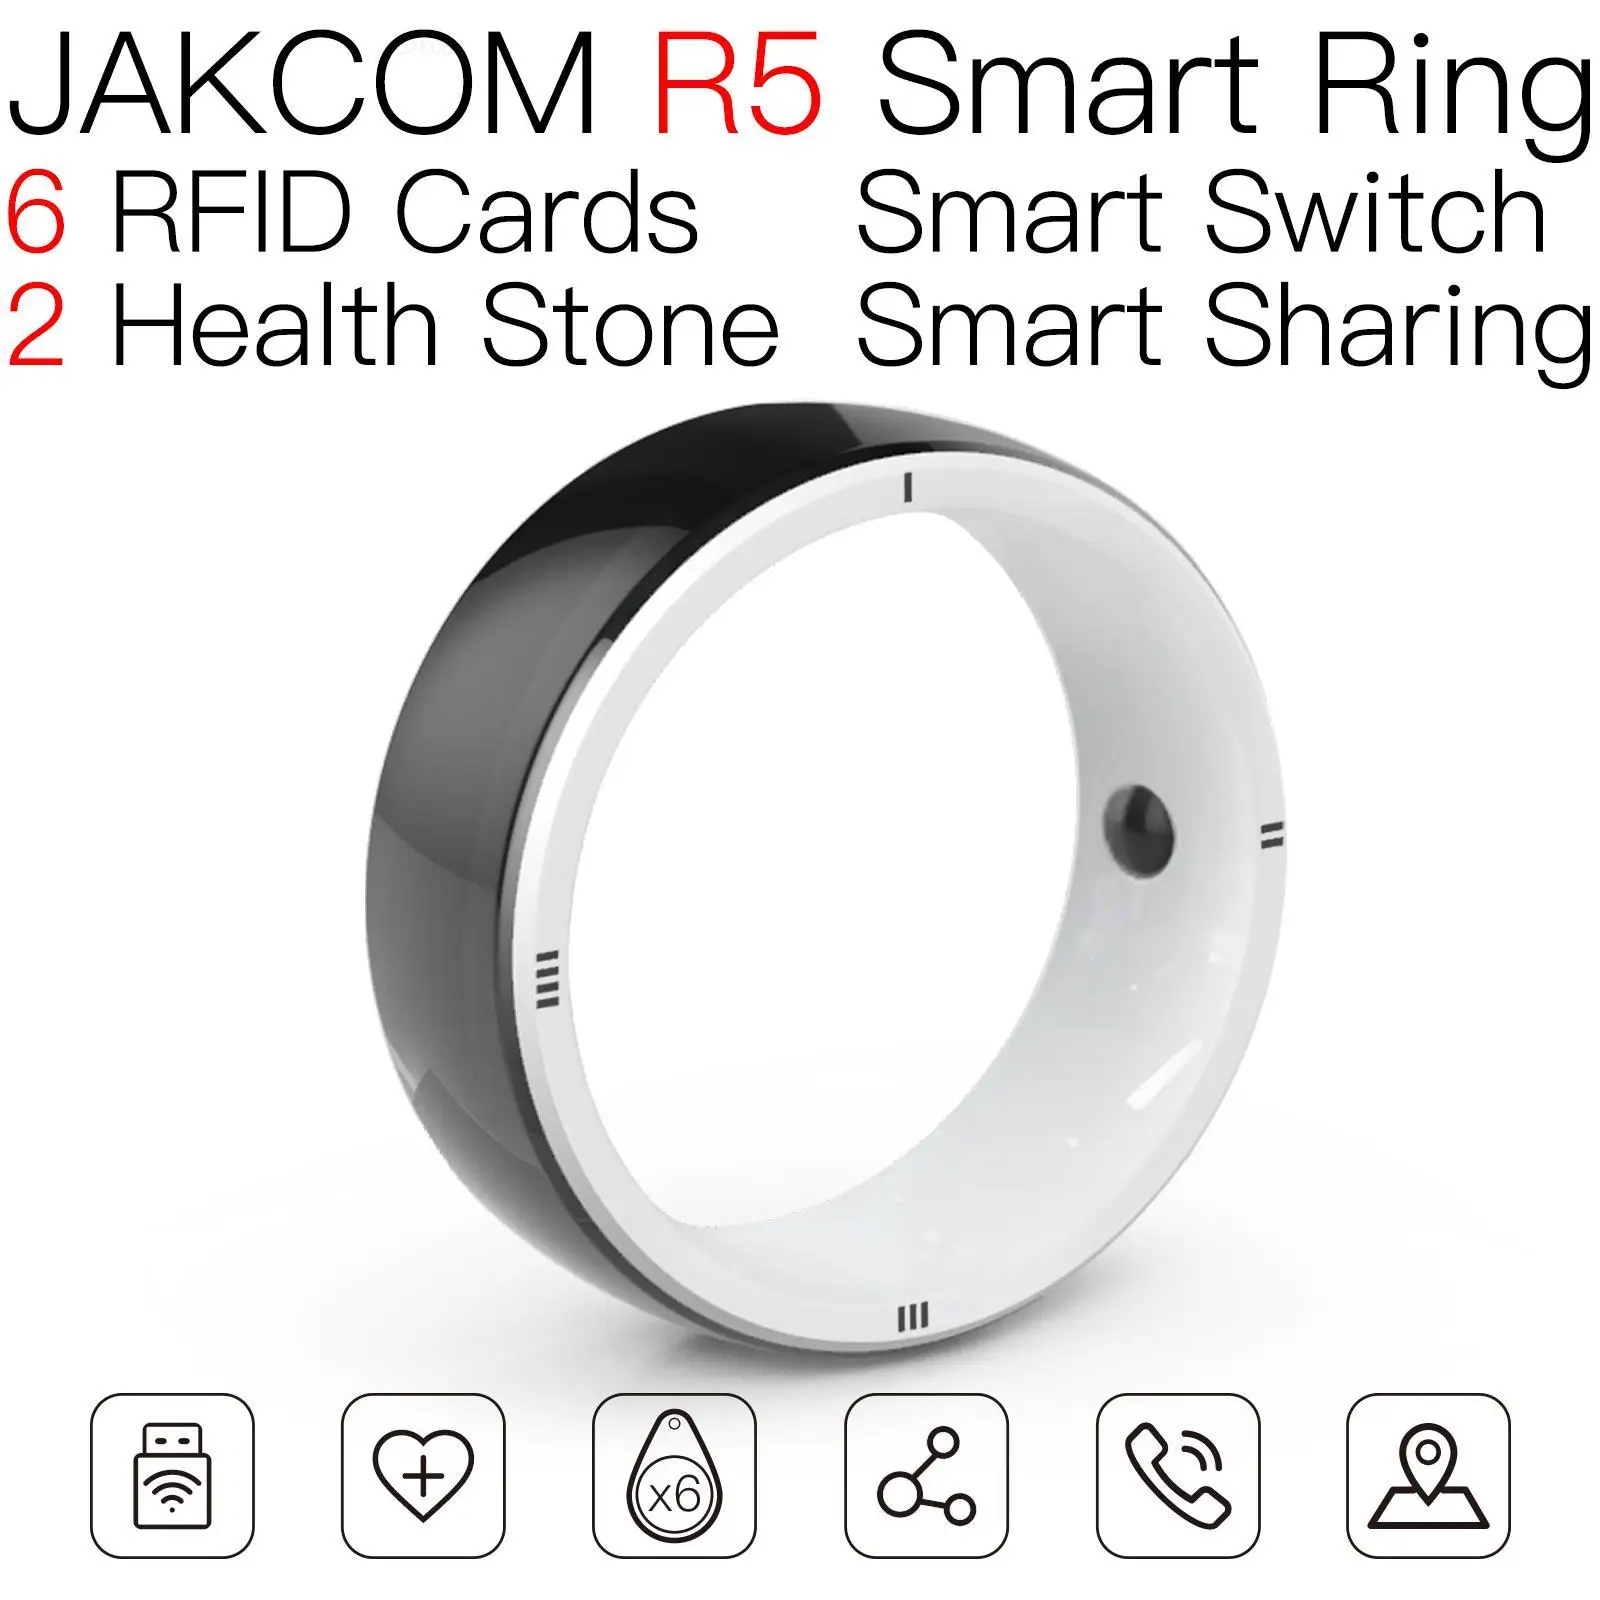 

JAKCOM R5 Smart Ring Super value than rfid uhf paper labels antenna nfc chip 7 byte uid tag with hf anti metal